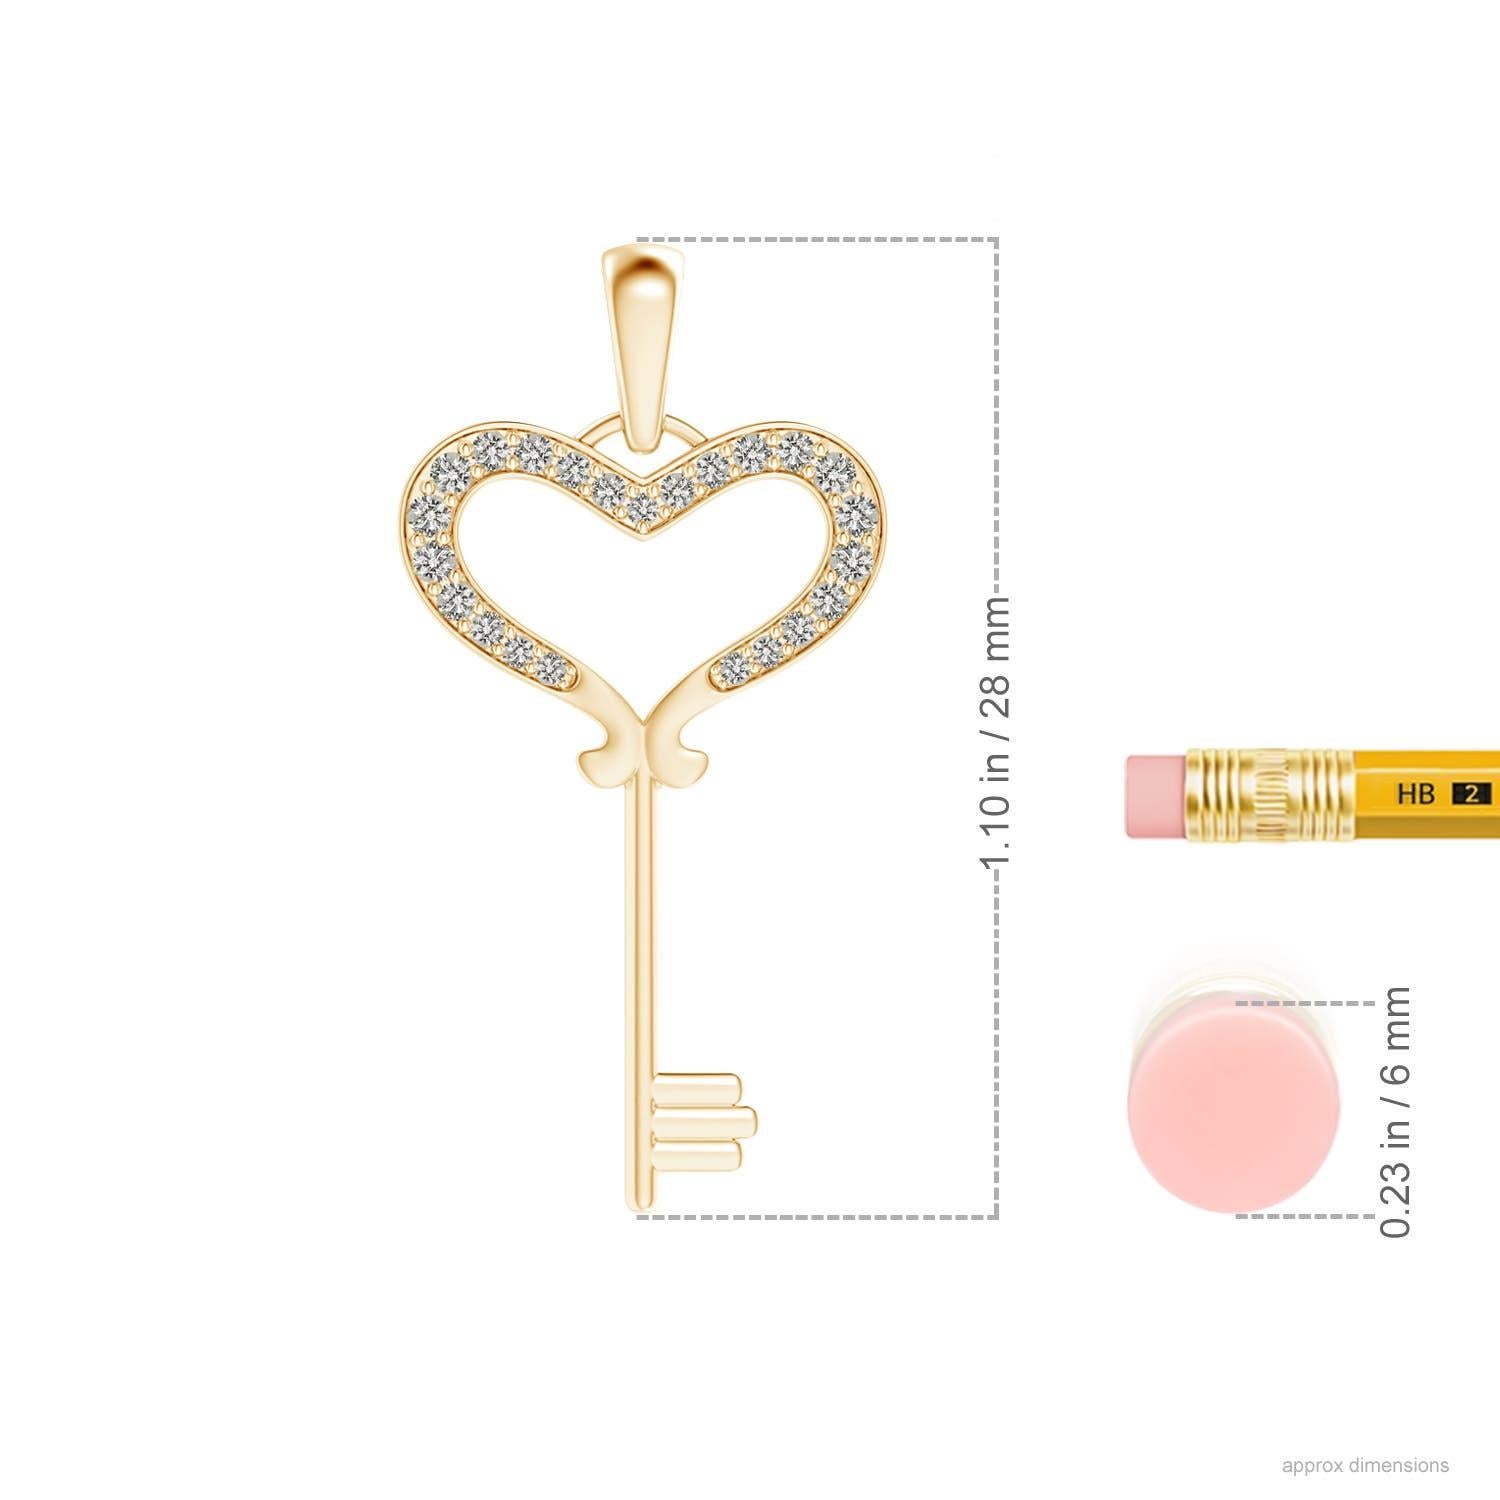 This adorable heart key pendant is designed with a touch of romance. Diamonds, encrusted on the open heart, dazzle in an intricate pave setting. Beautifully crafted in 14k yellow gold, this diamond key pendant embodies timeless glamour.
Diamond is